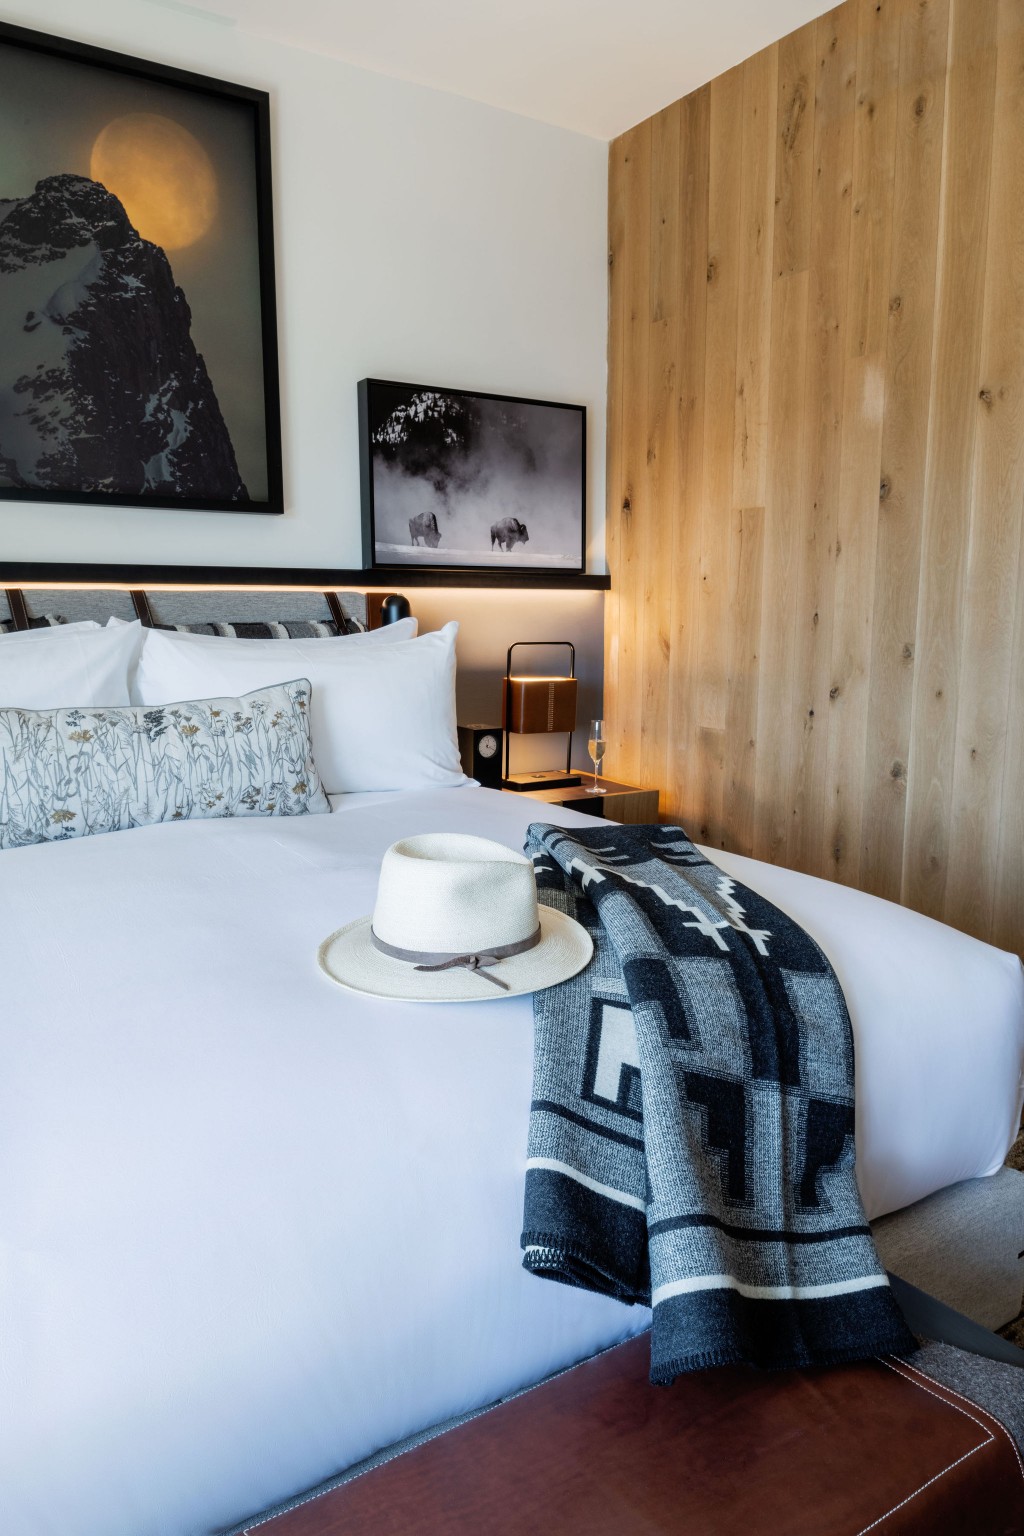 The Cloudveil is committed to supporting local artists and has curated an extensive art collection, installed throughout the property. Black-and-white photographs add contrast and a point of focus in a guest room.